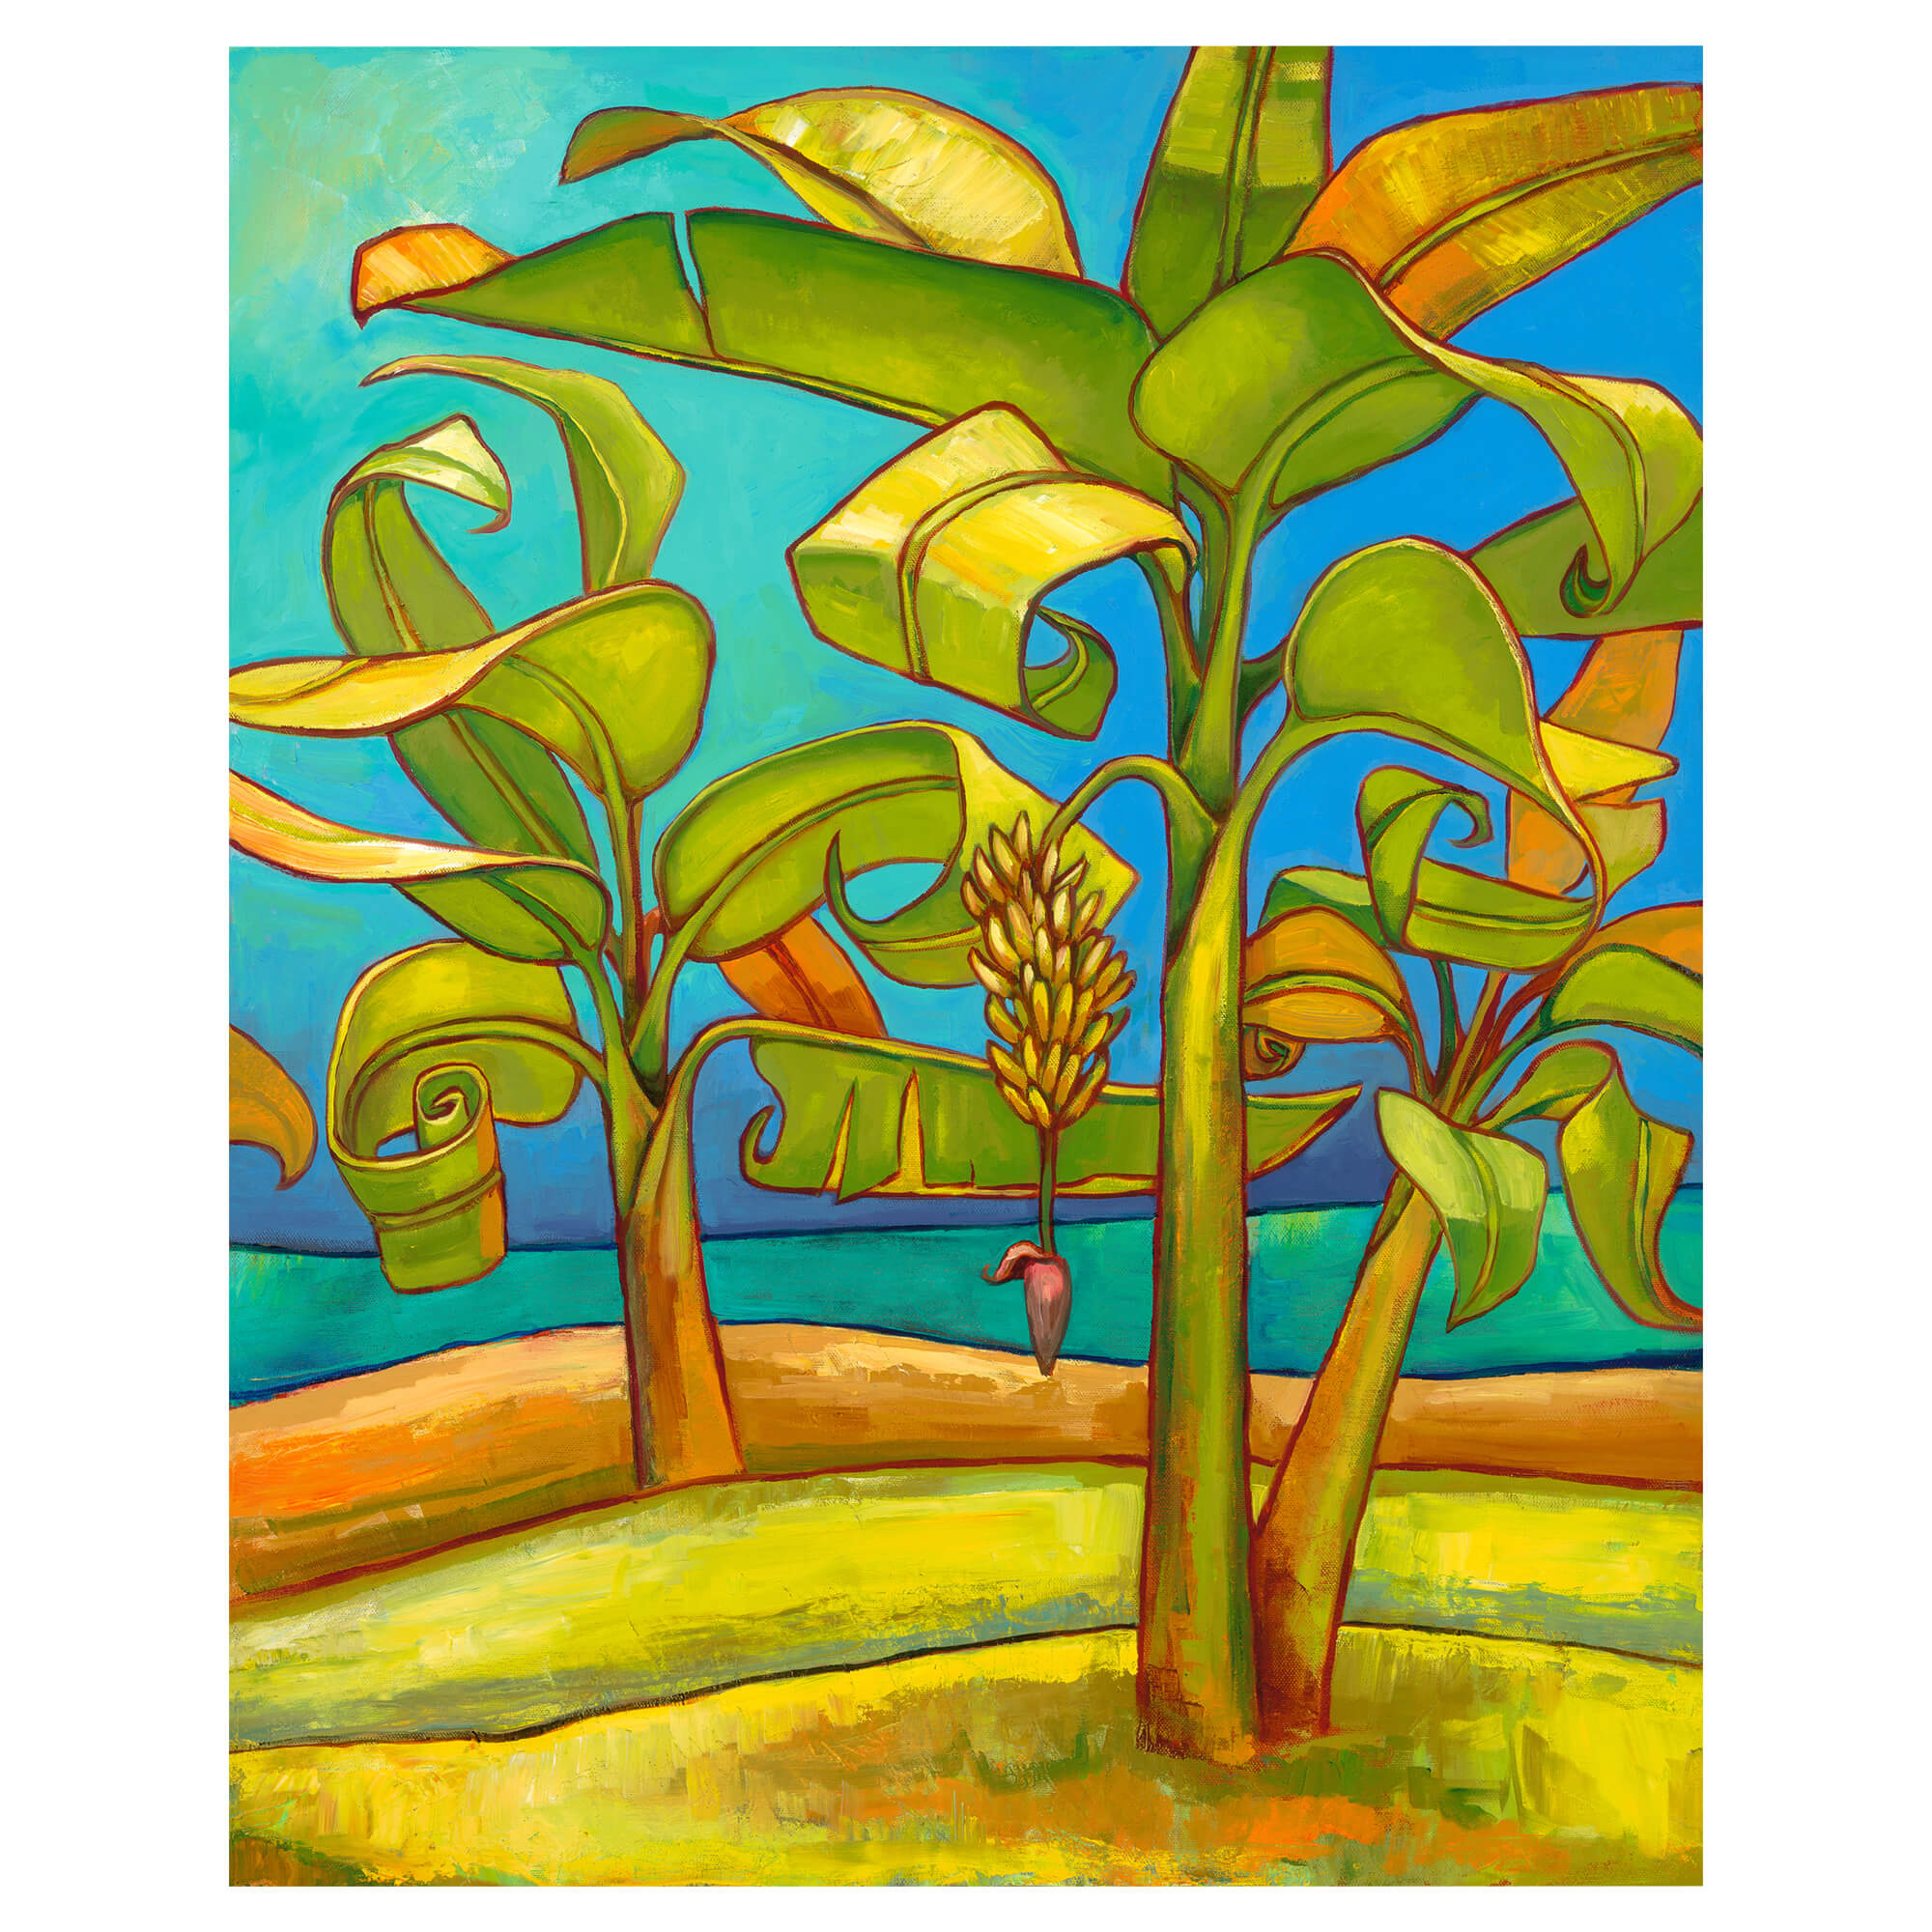 A playful depiction of banana trees with fruit by Hawaii artist Colin Redican